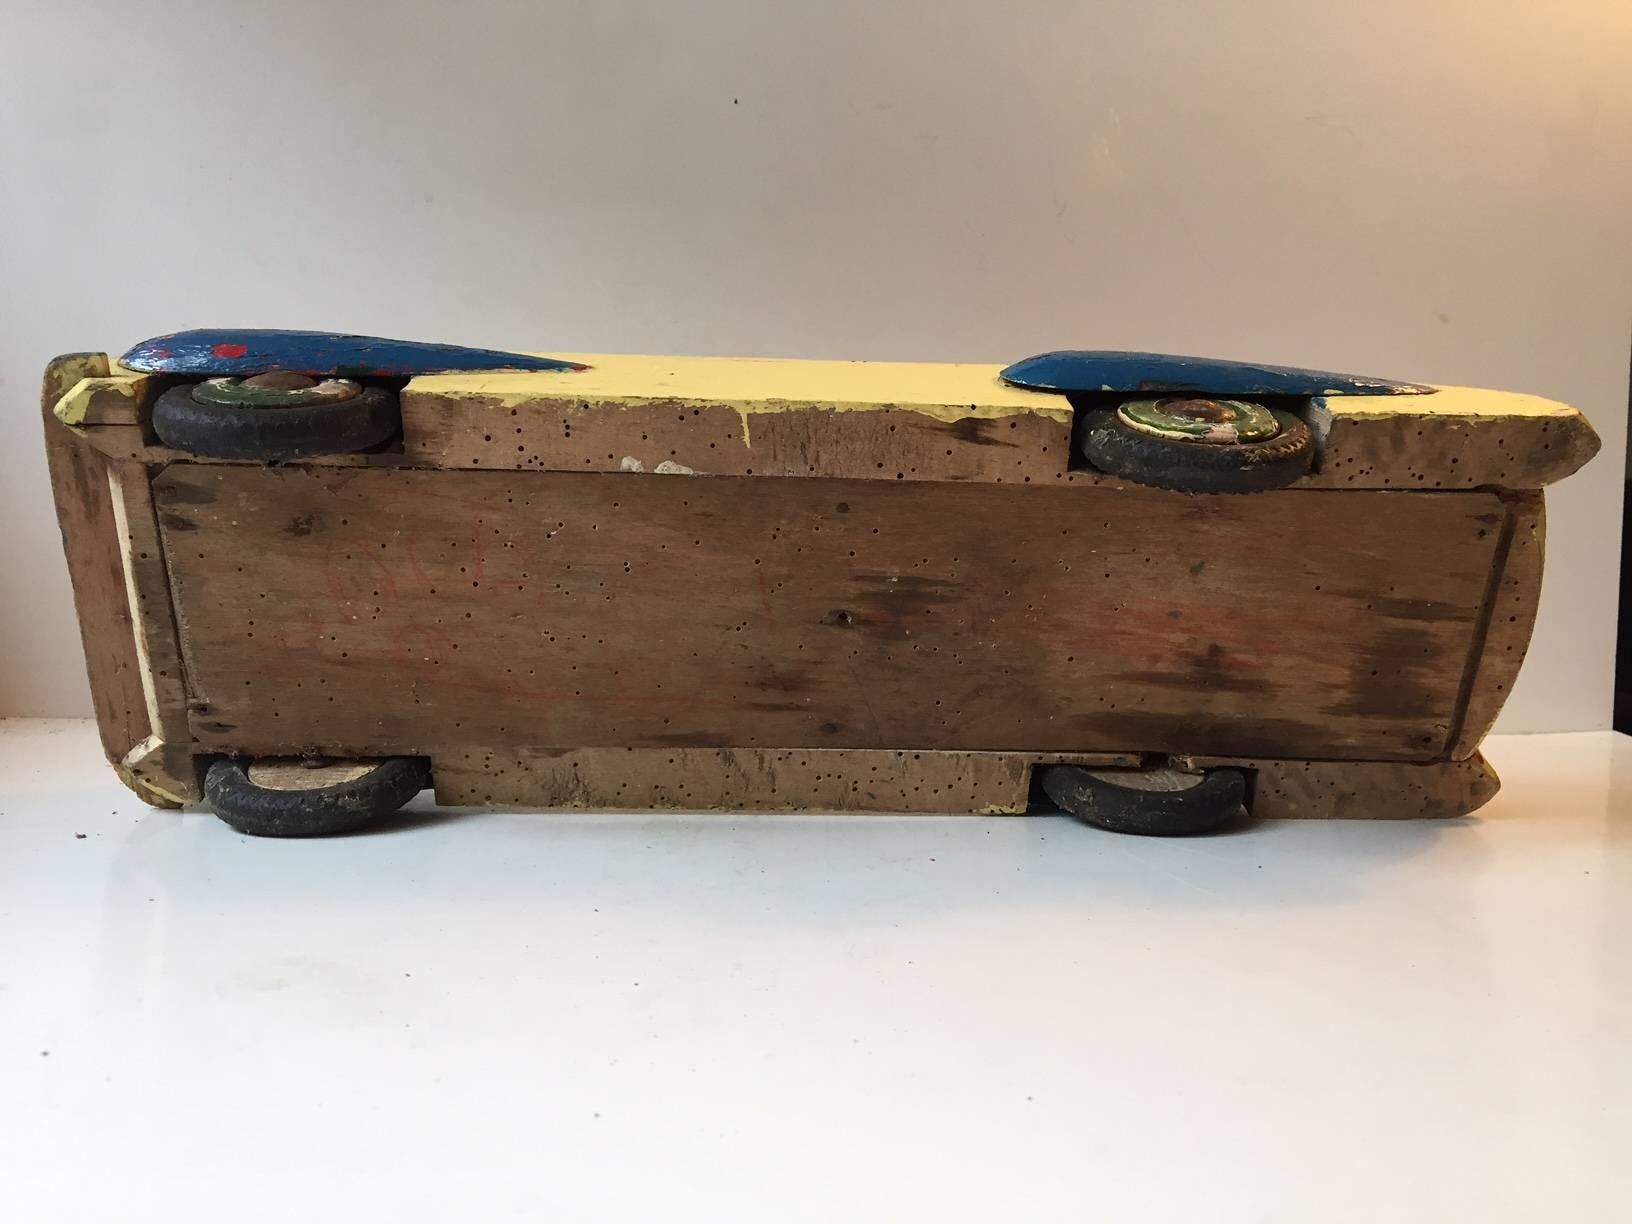 Art Deco Unique, Decorative & Rustic 1930s Streamlined Wooden Toy Car with Dunlop Tires